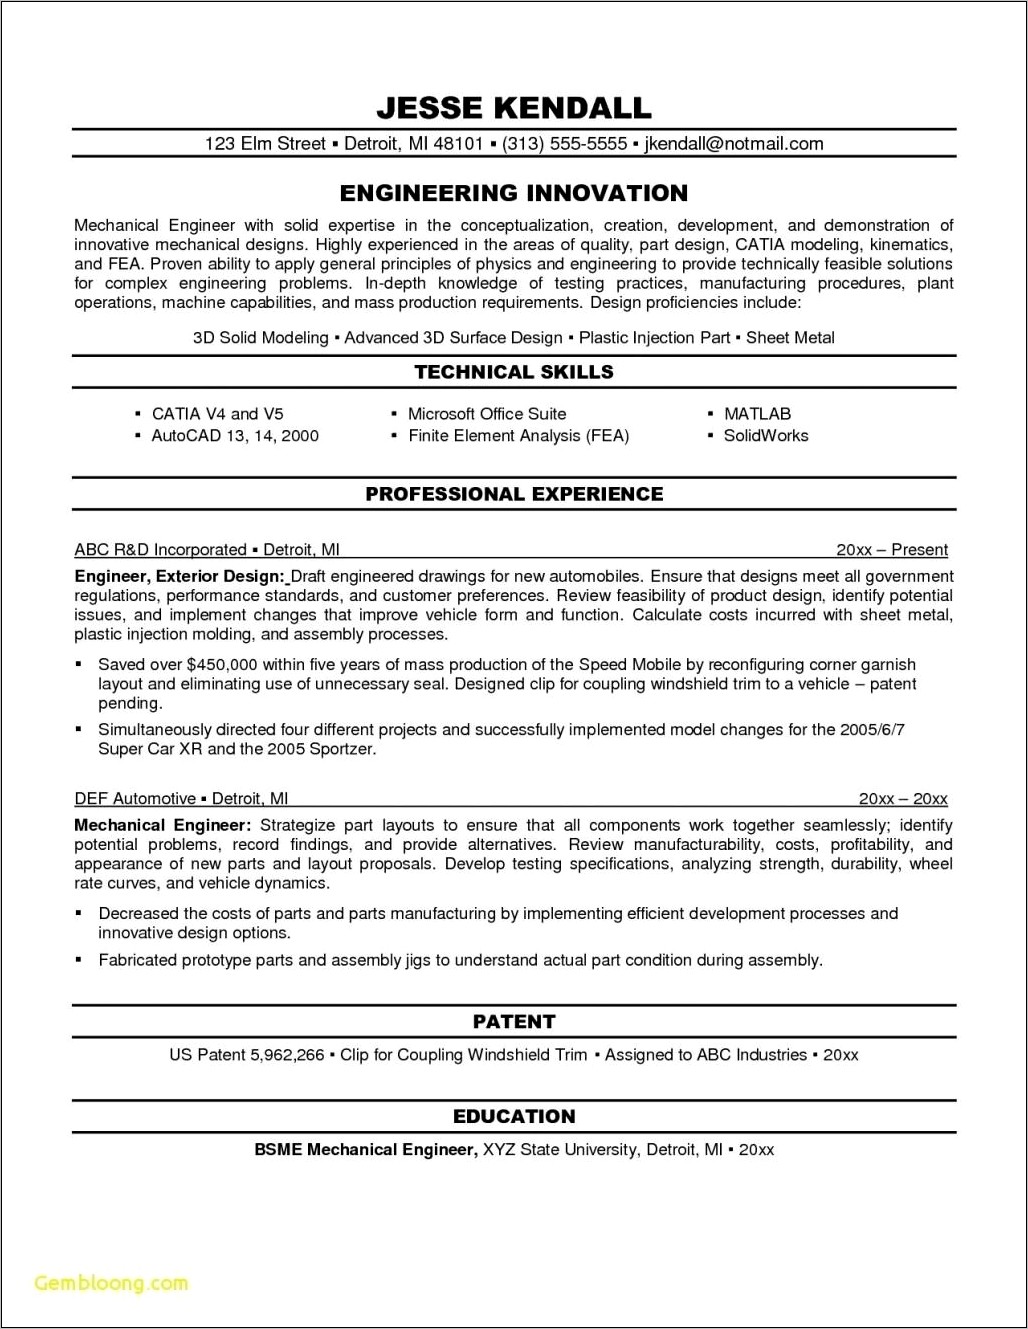 Resume Objective Entry Level Engineer